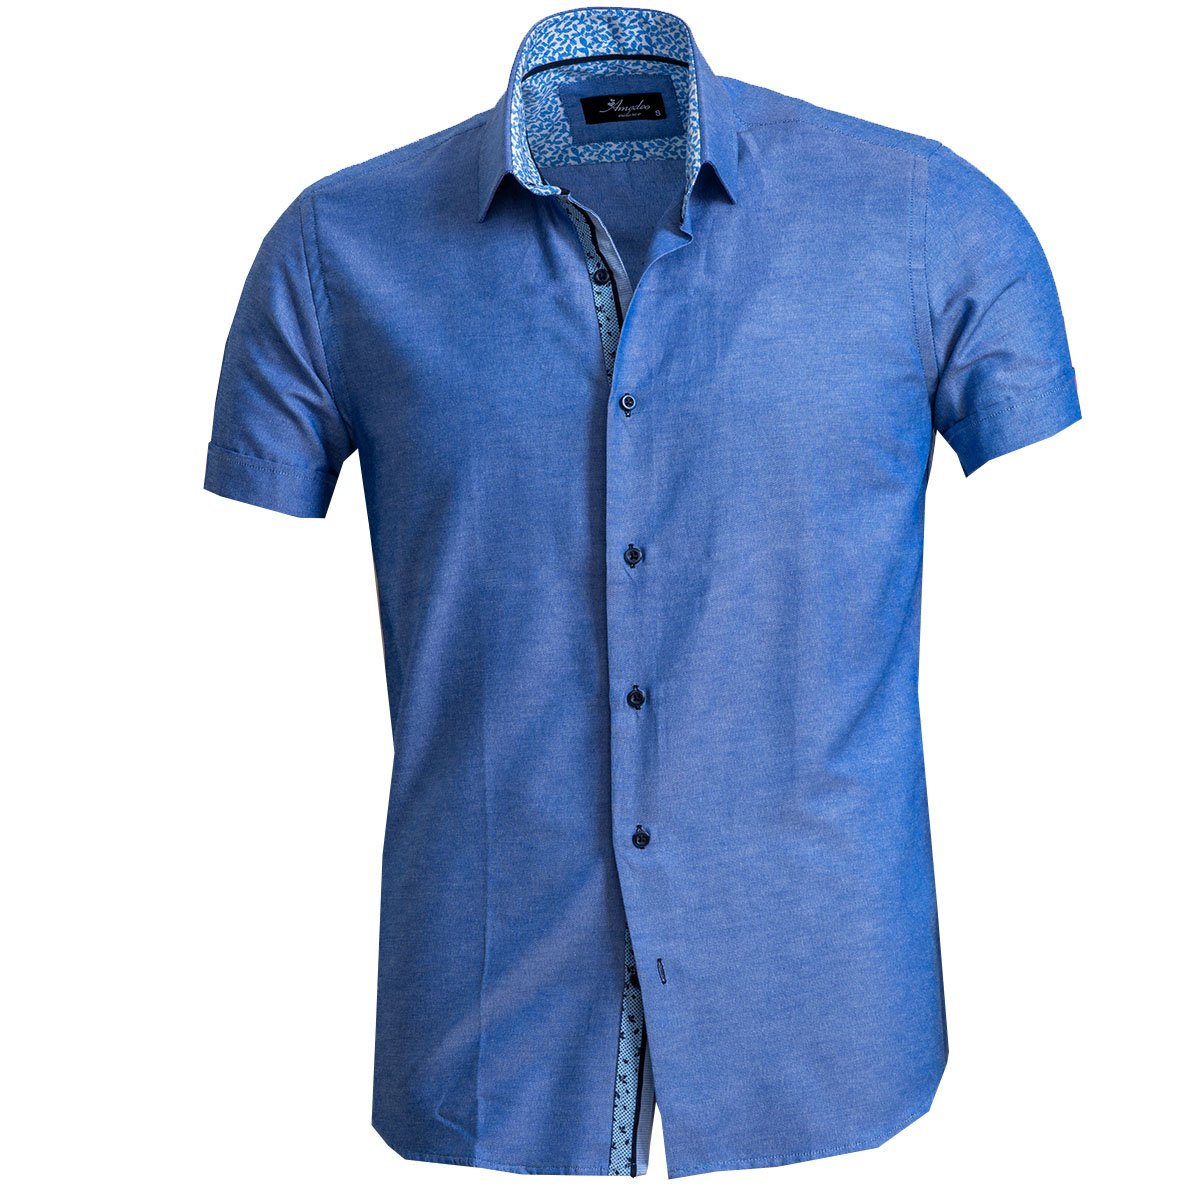 Men's Button down Tailor Fit Soft 100% Cotton Short Sleeve Dress Shirt Denim Blue casual And Formal - Amedeo Exclusive